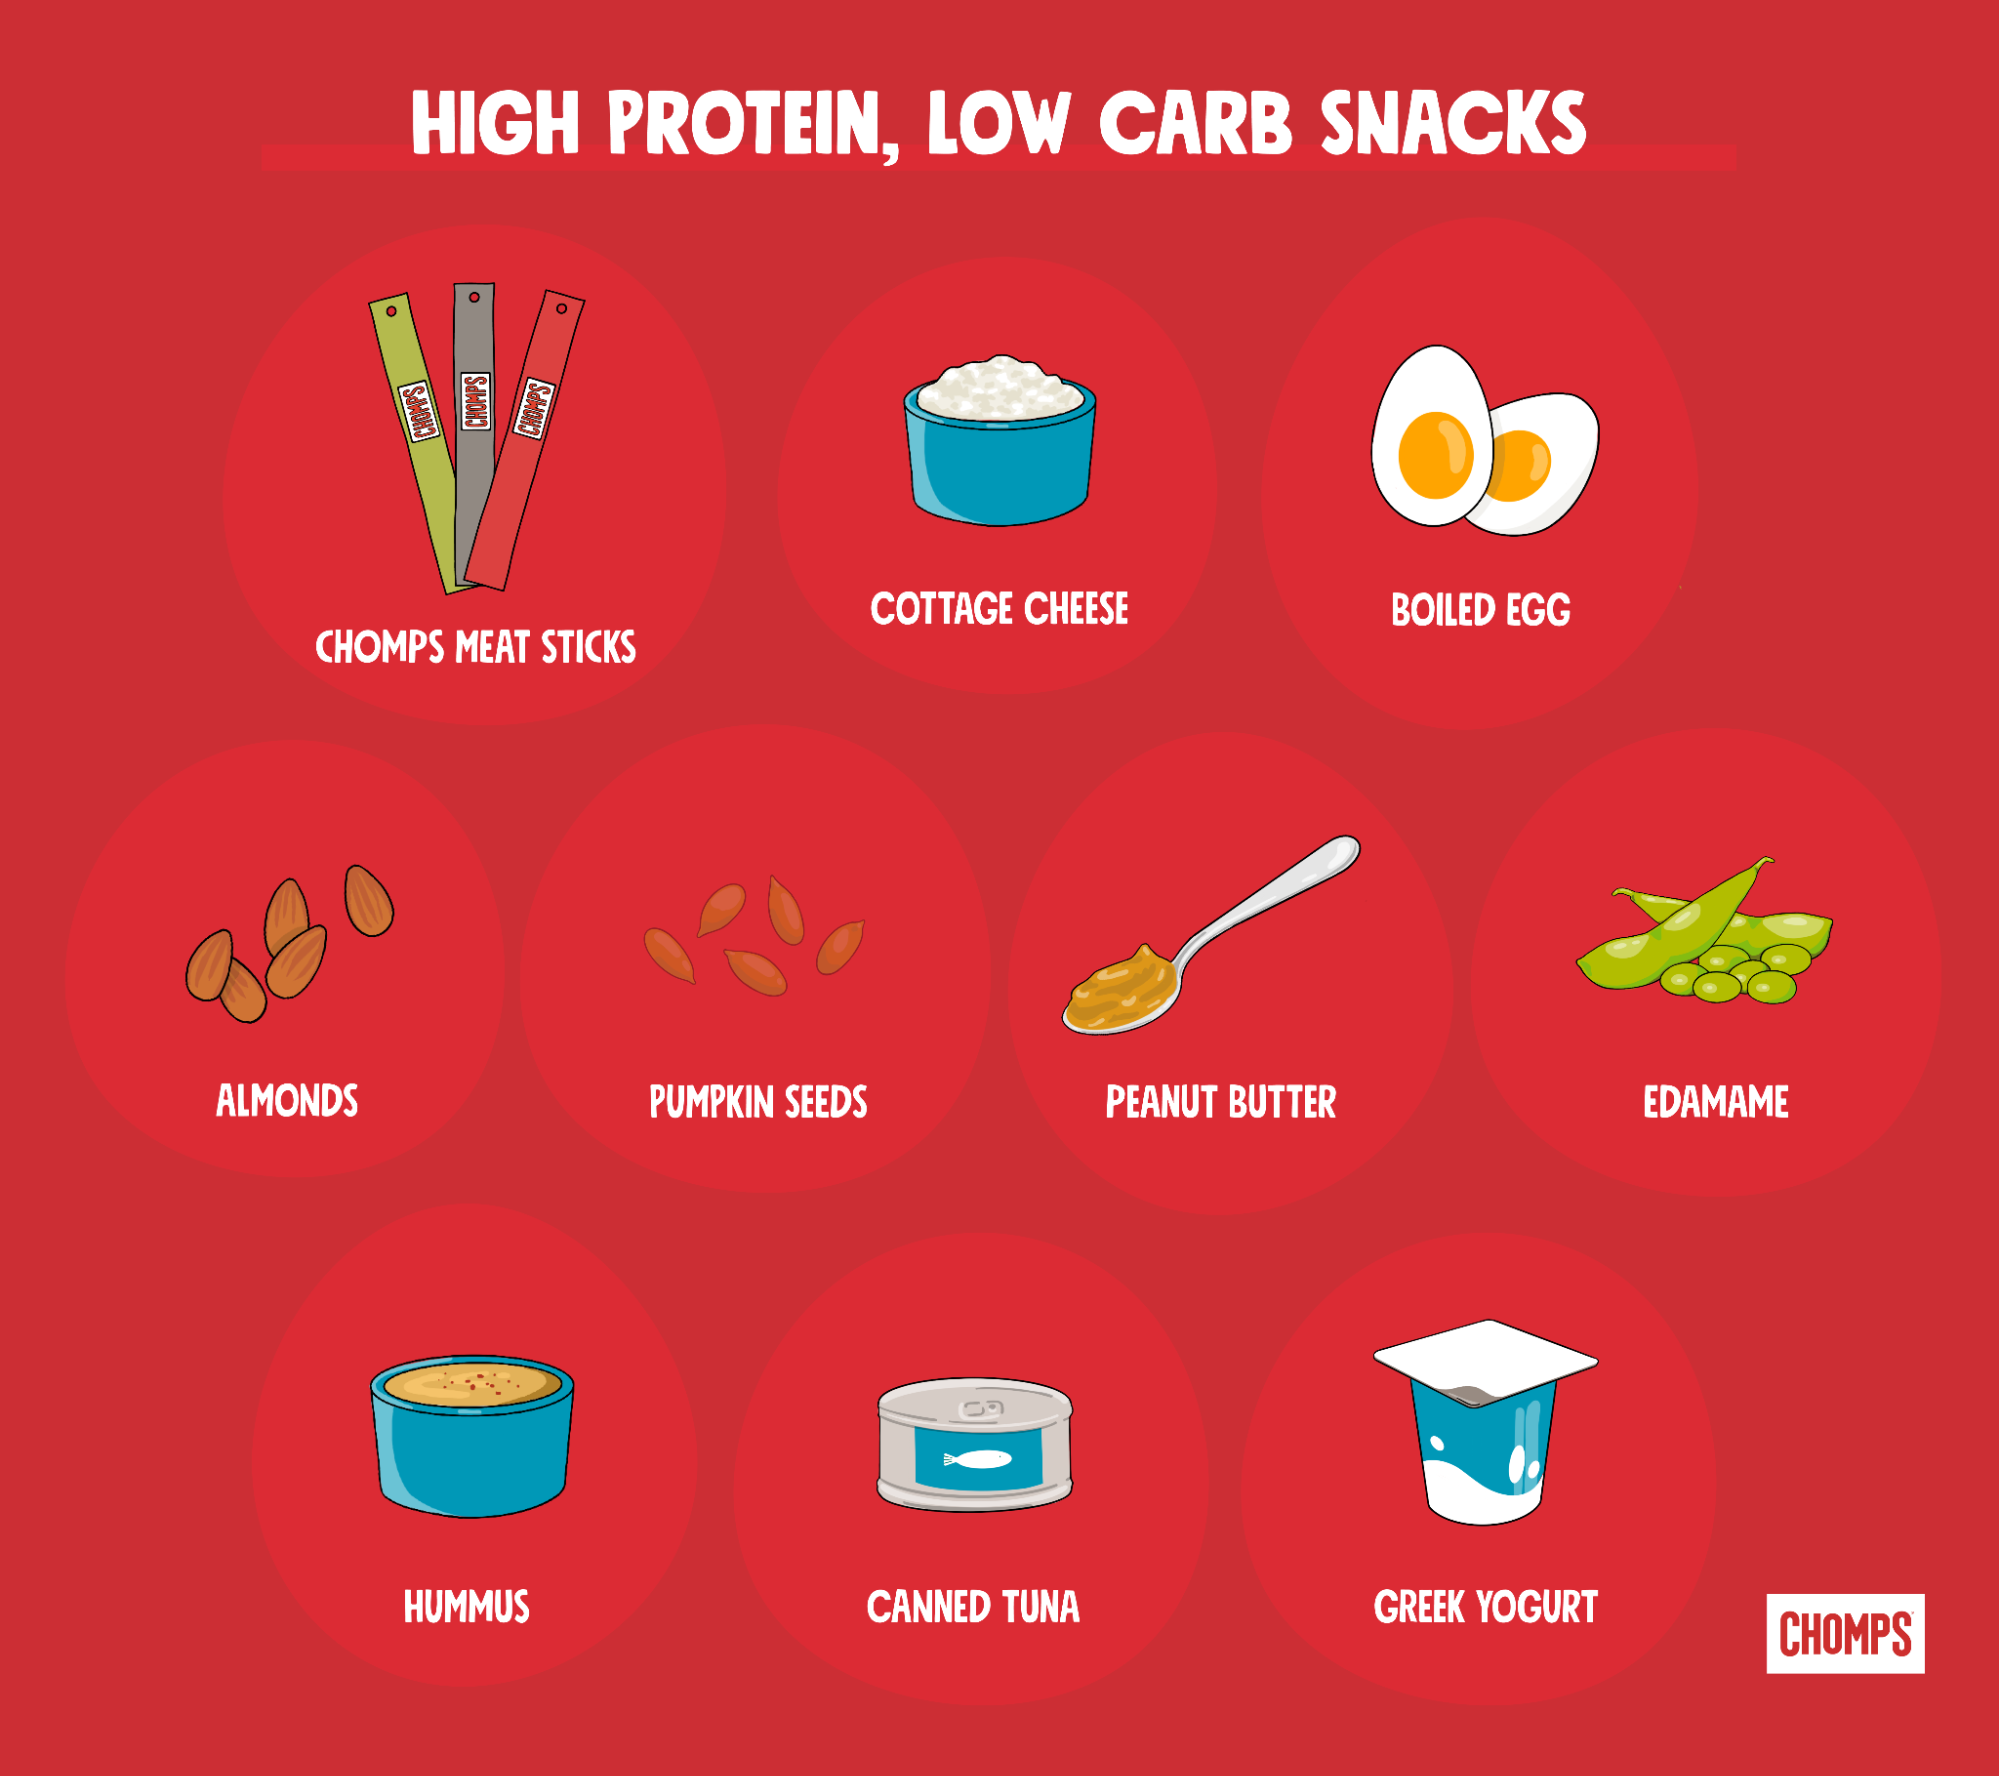 high protein, low-carb snacks by chomps